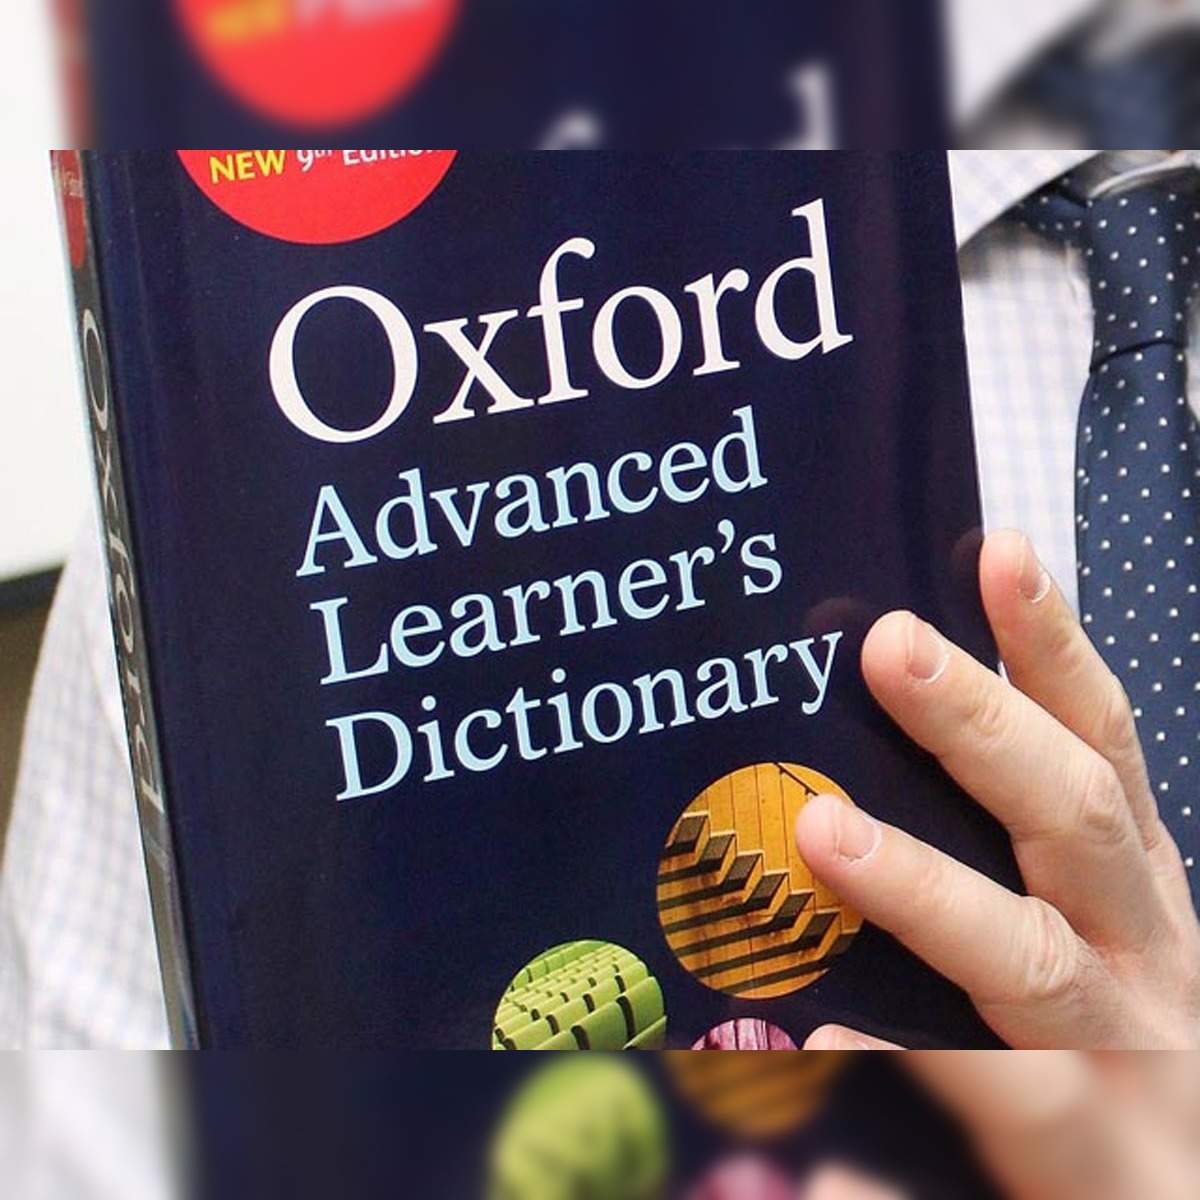 Oxford English Dictionary: Indian word 'chuddies' makes it to Oxford  Dictionary after being used in BBC show 'Goodness Gracious Me' - The  Economic Times